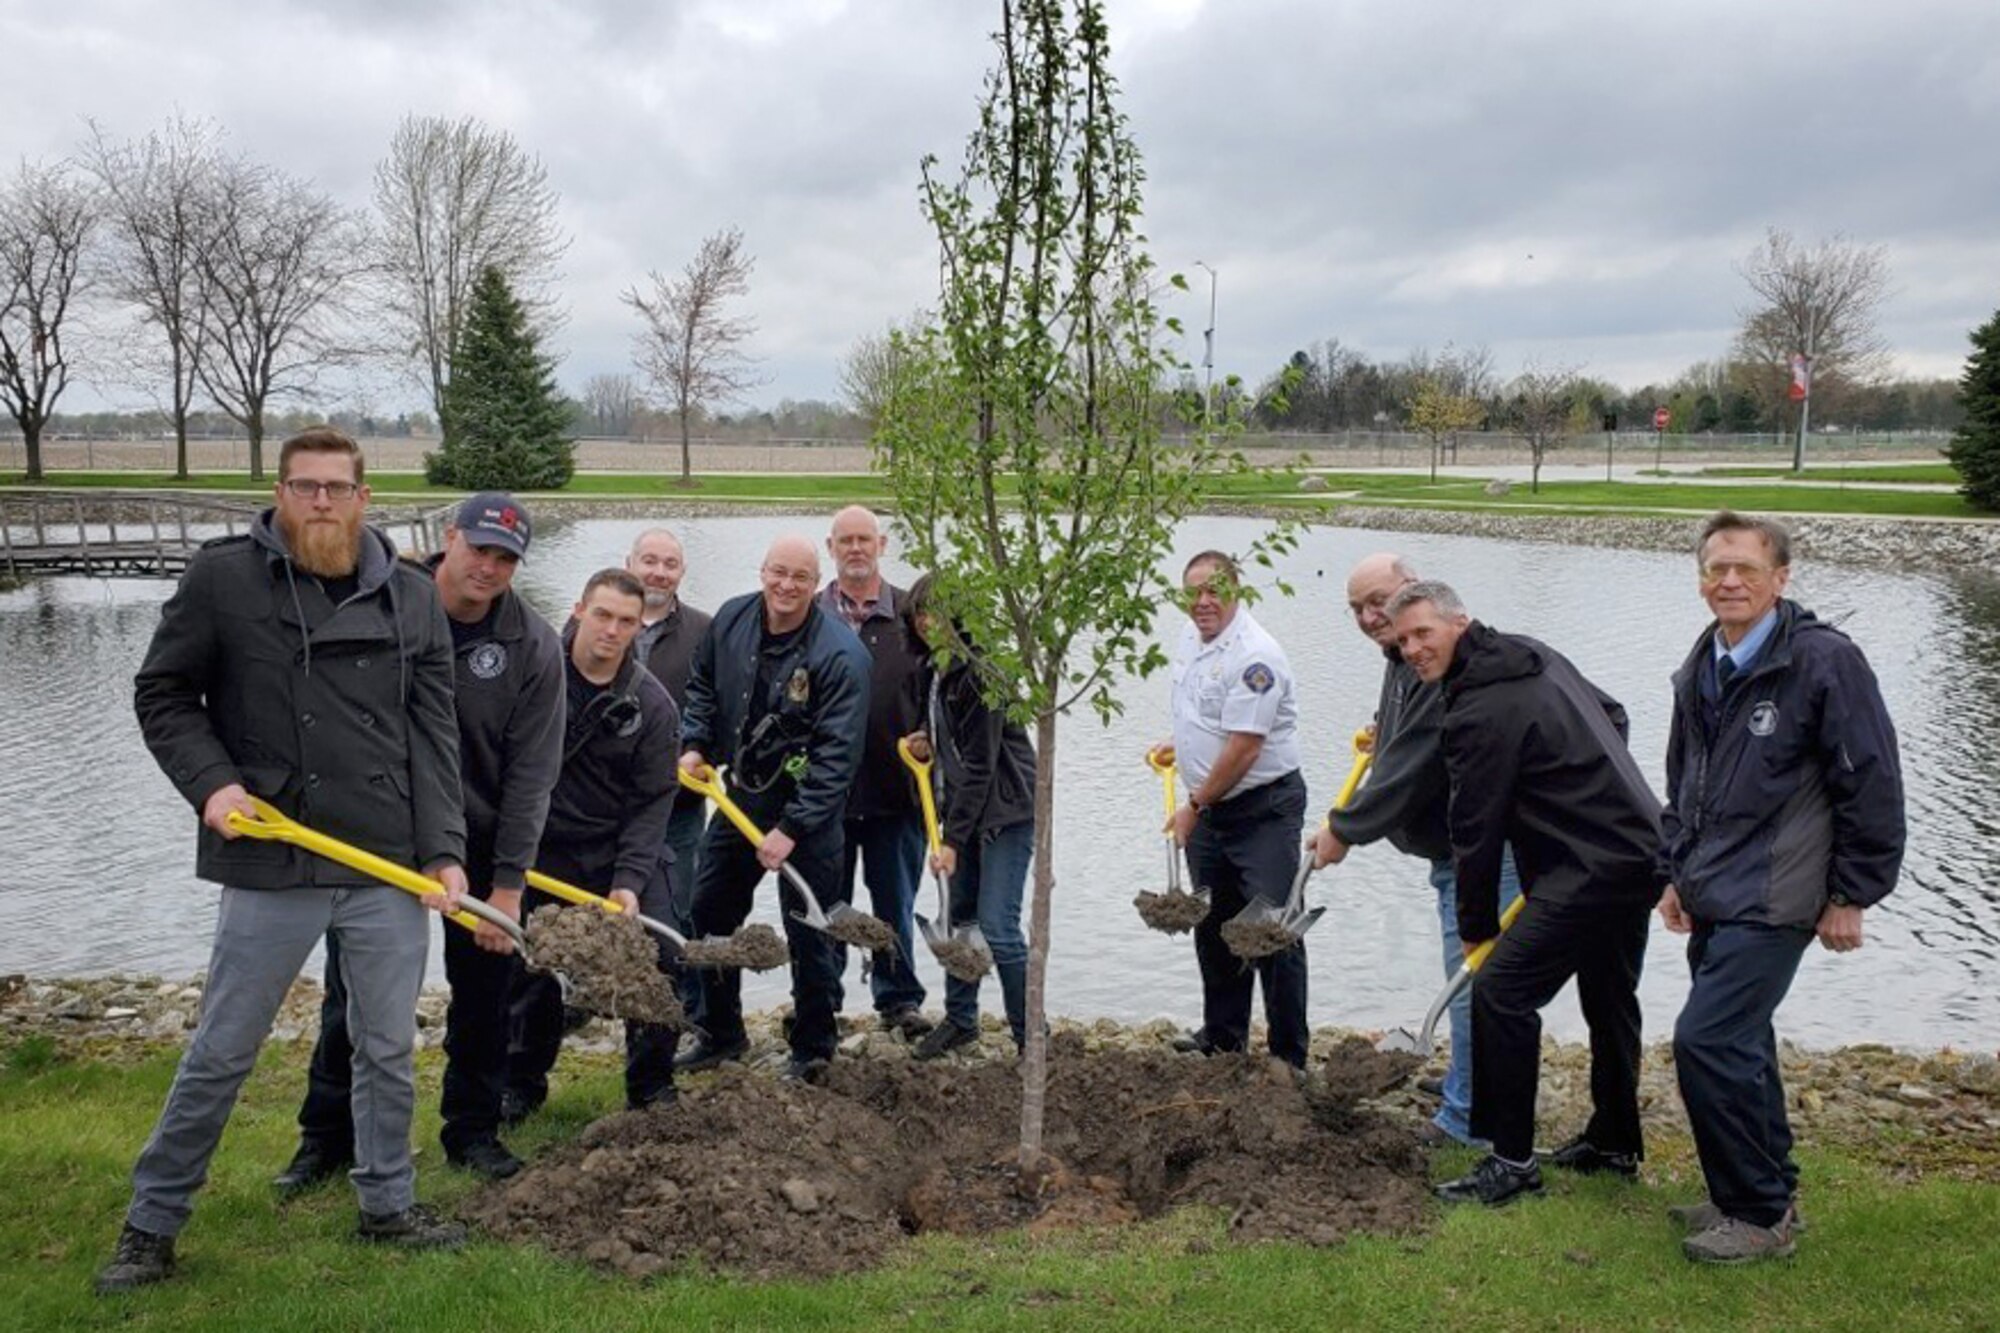 Grissom personnel pose for a photo during a special Arbor Day ceremony held here April 26, 2019. Each year Arbor Day is celebrated on the last Friday of April. Its celebration provides an opportunity to learn about trees and take positive action to make the world a better place. (U.S. Air Force photo/Master Sgt. Ben Mota)